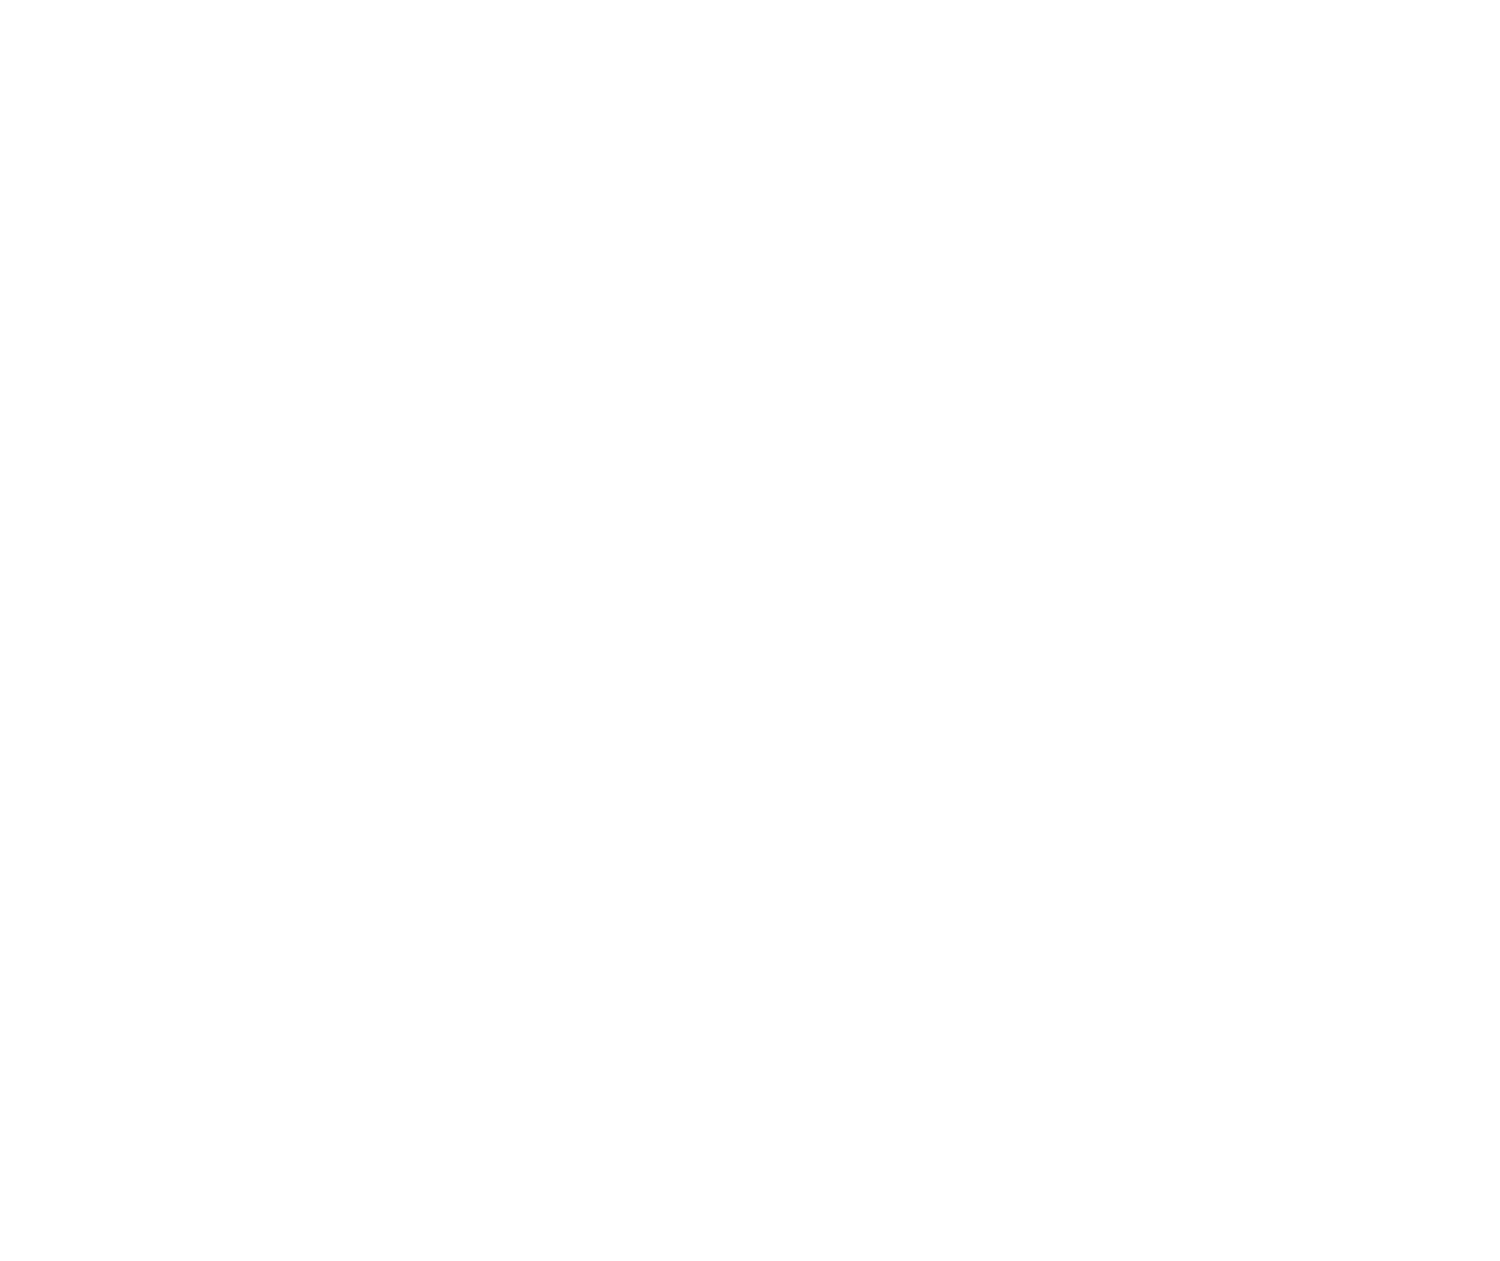 Mike Naig for Iowa Agriculture 